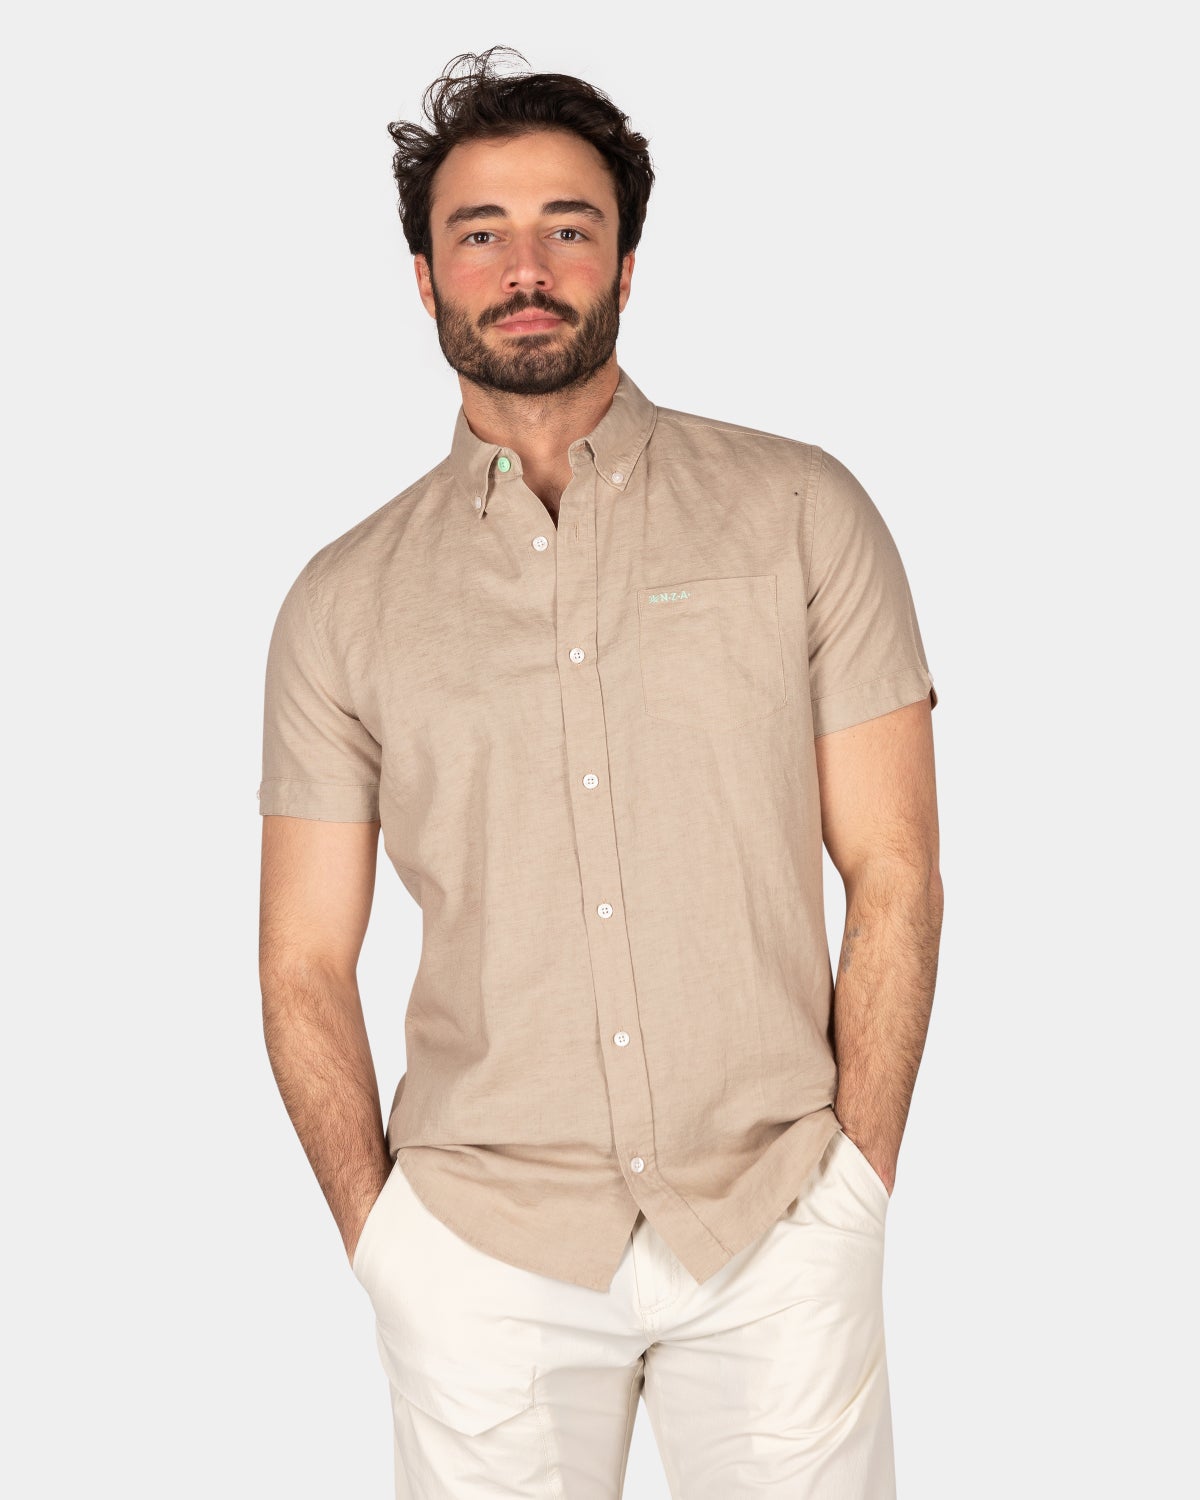 Chemise unie manches courtes - Shimmering Sand